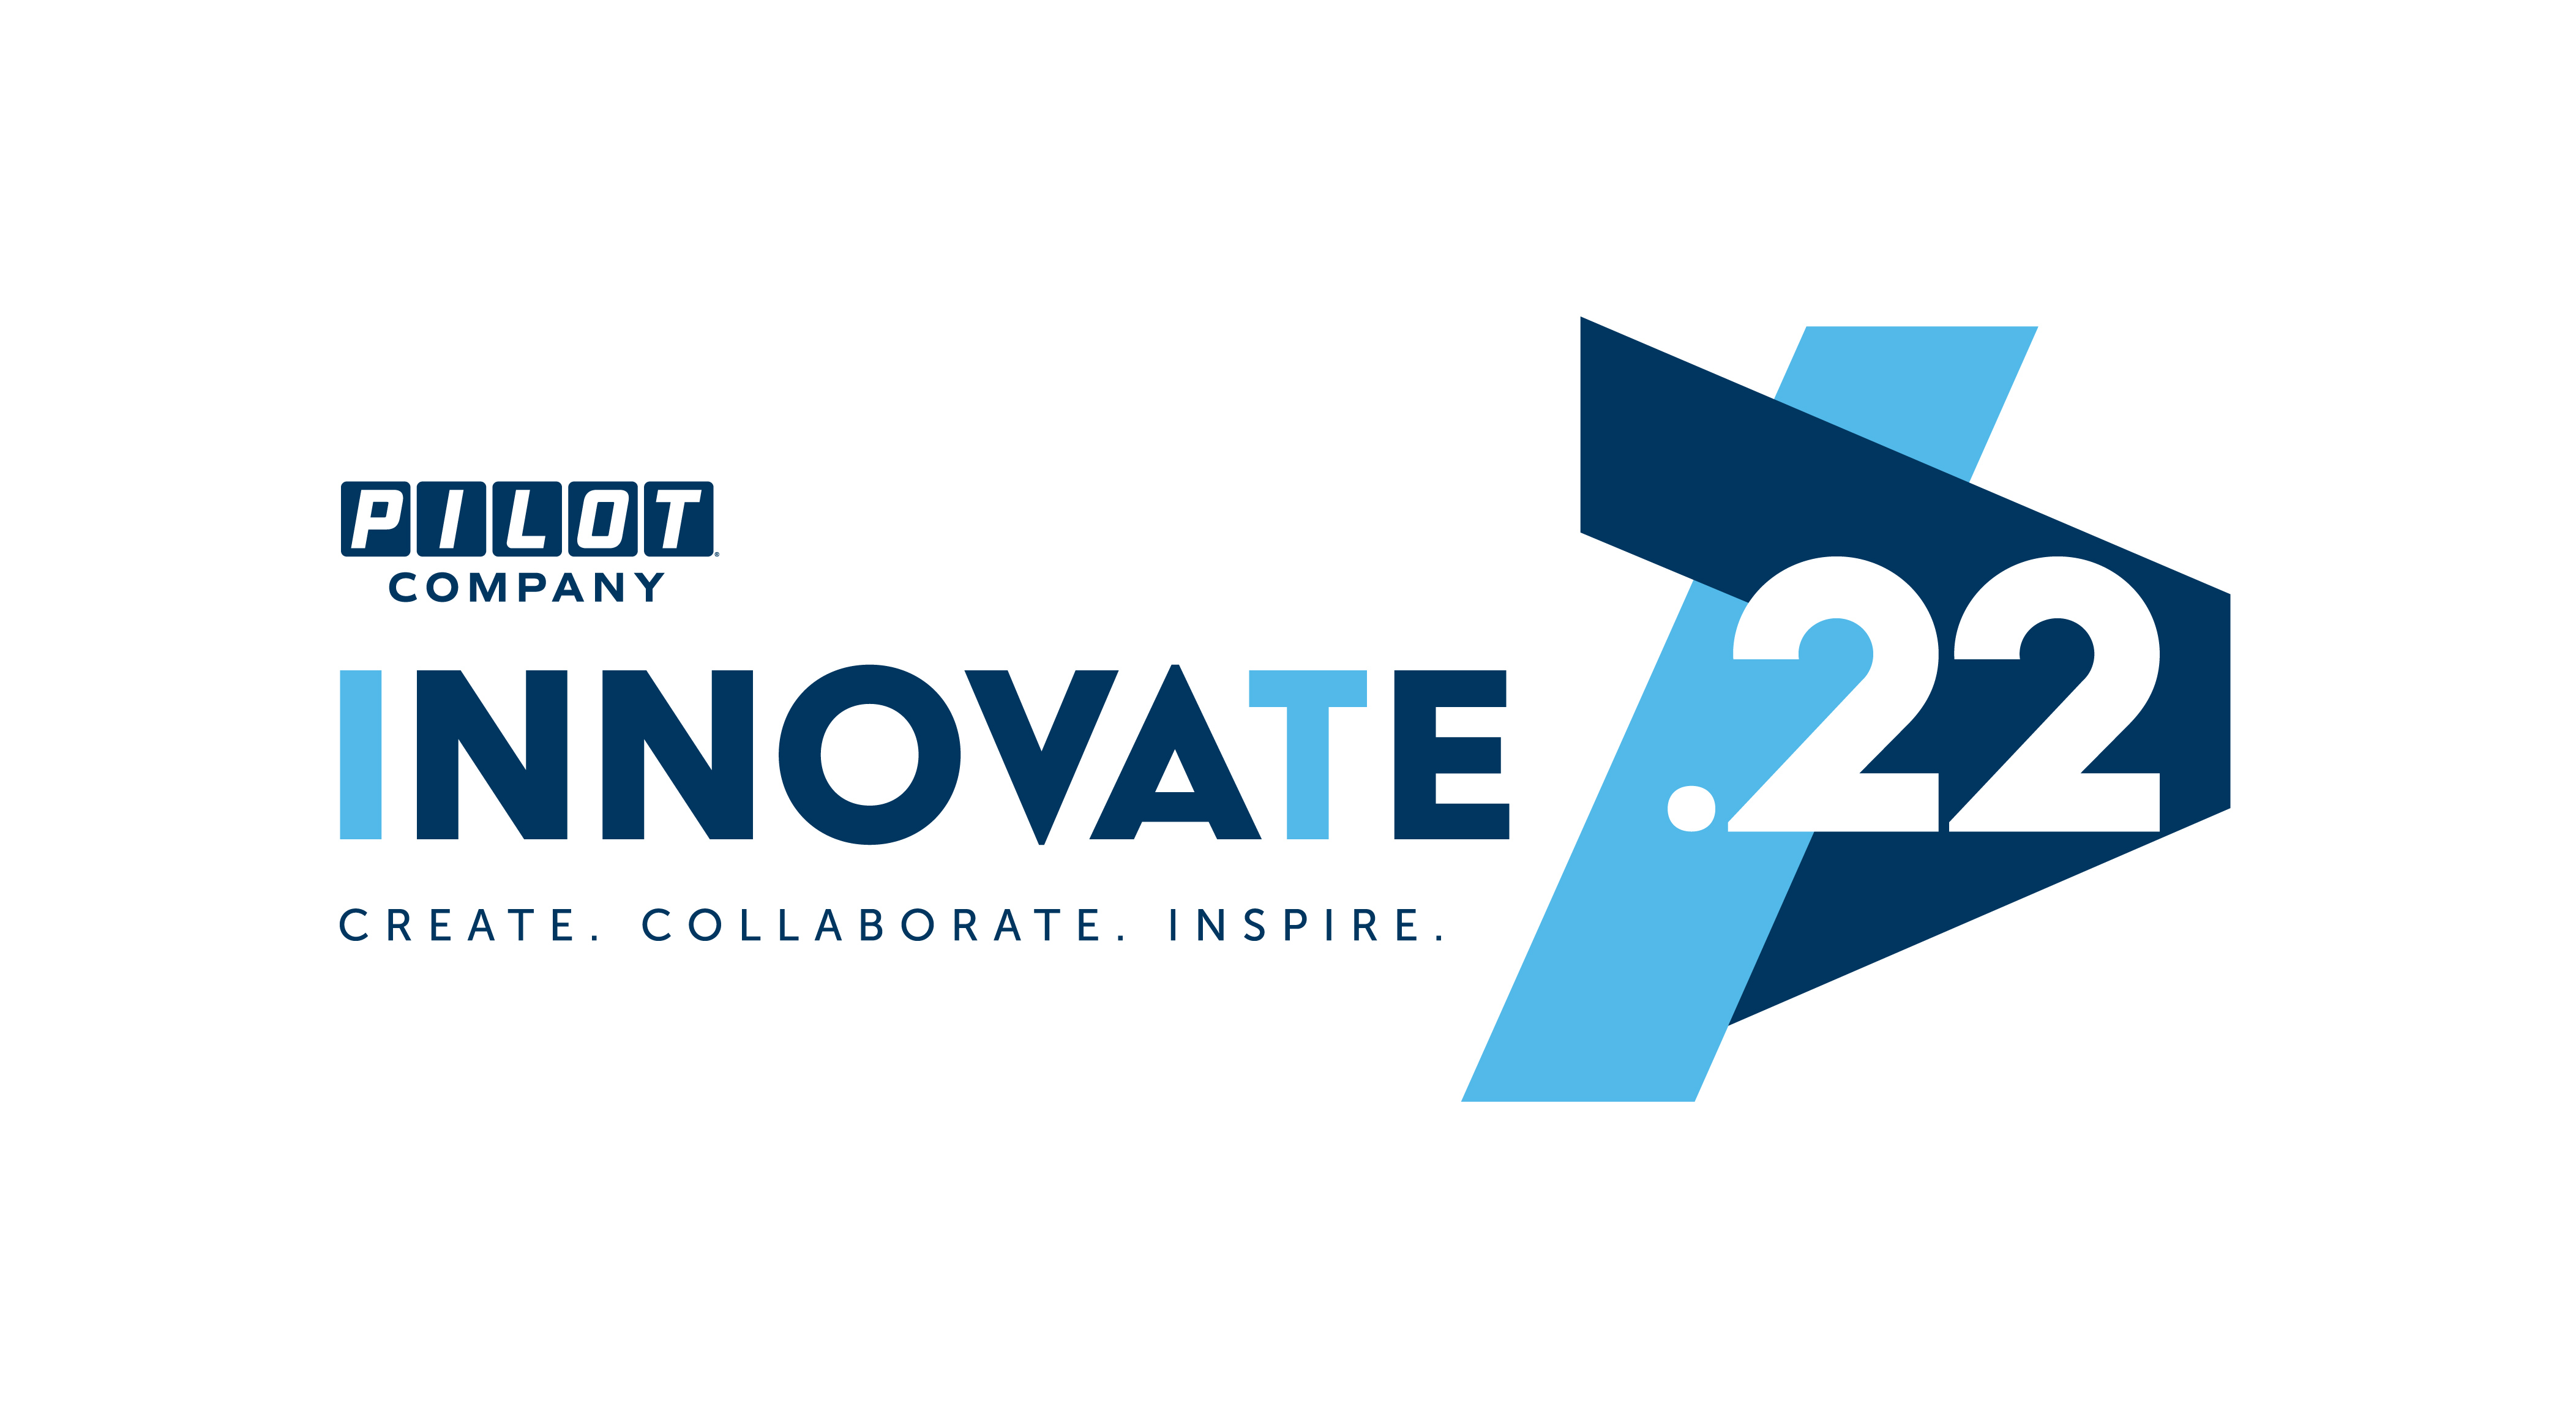 INNOVATE '22 IT hackathon for Pilot Company